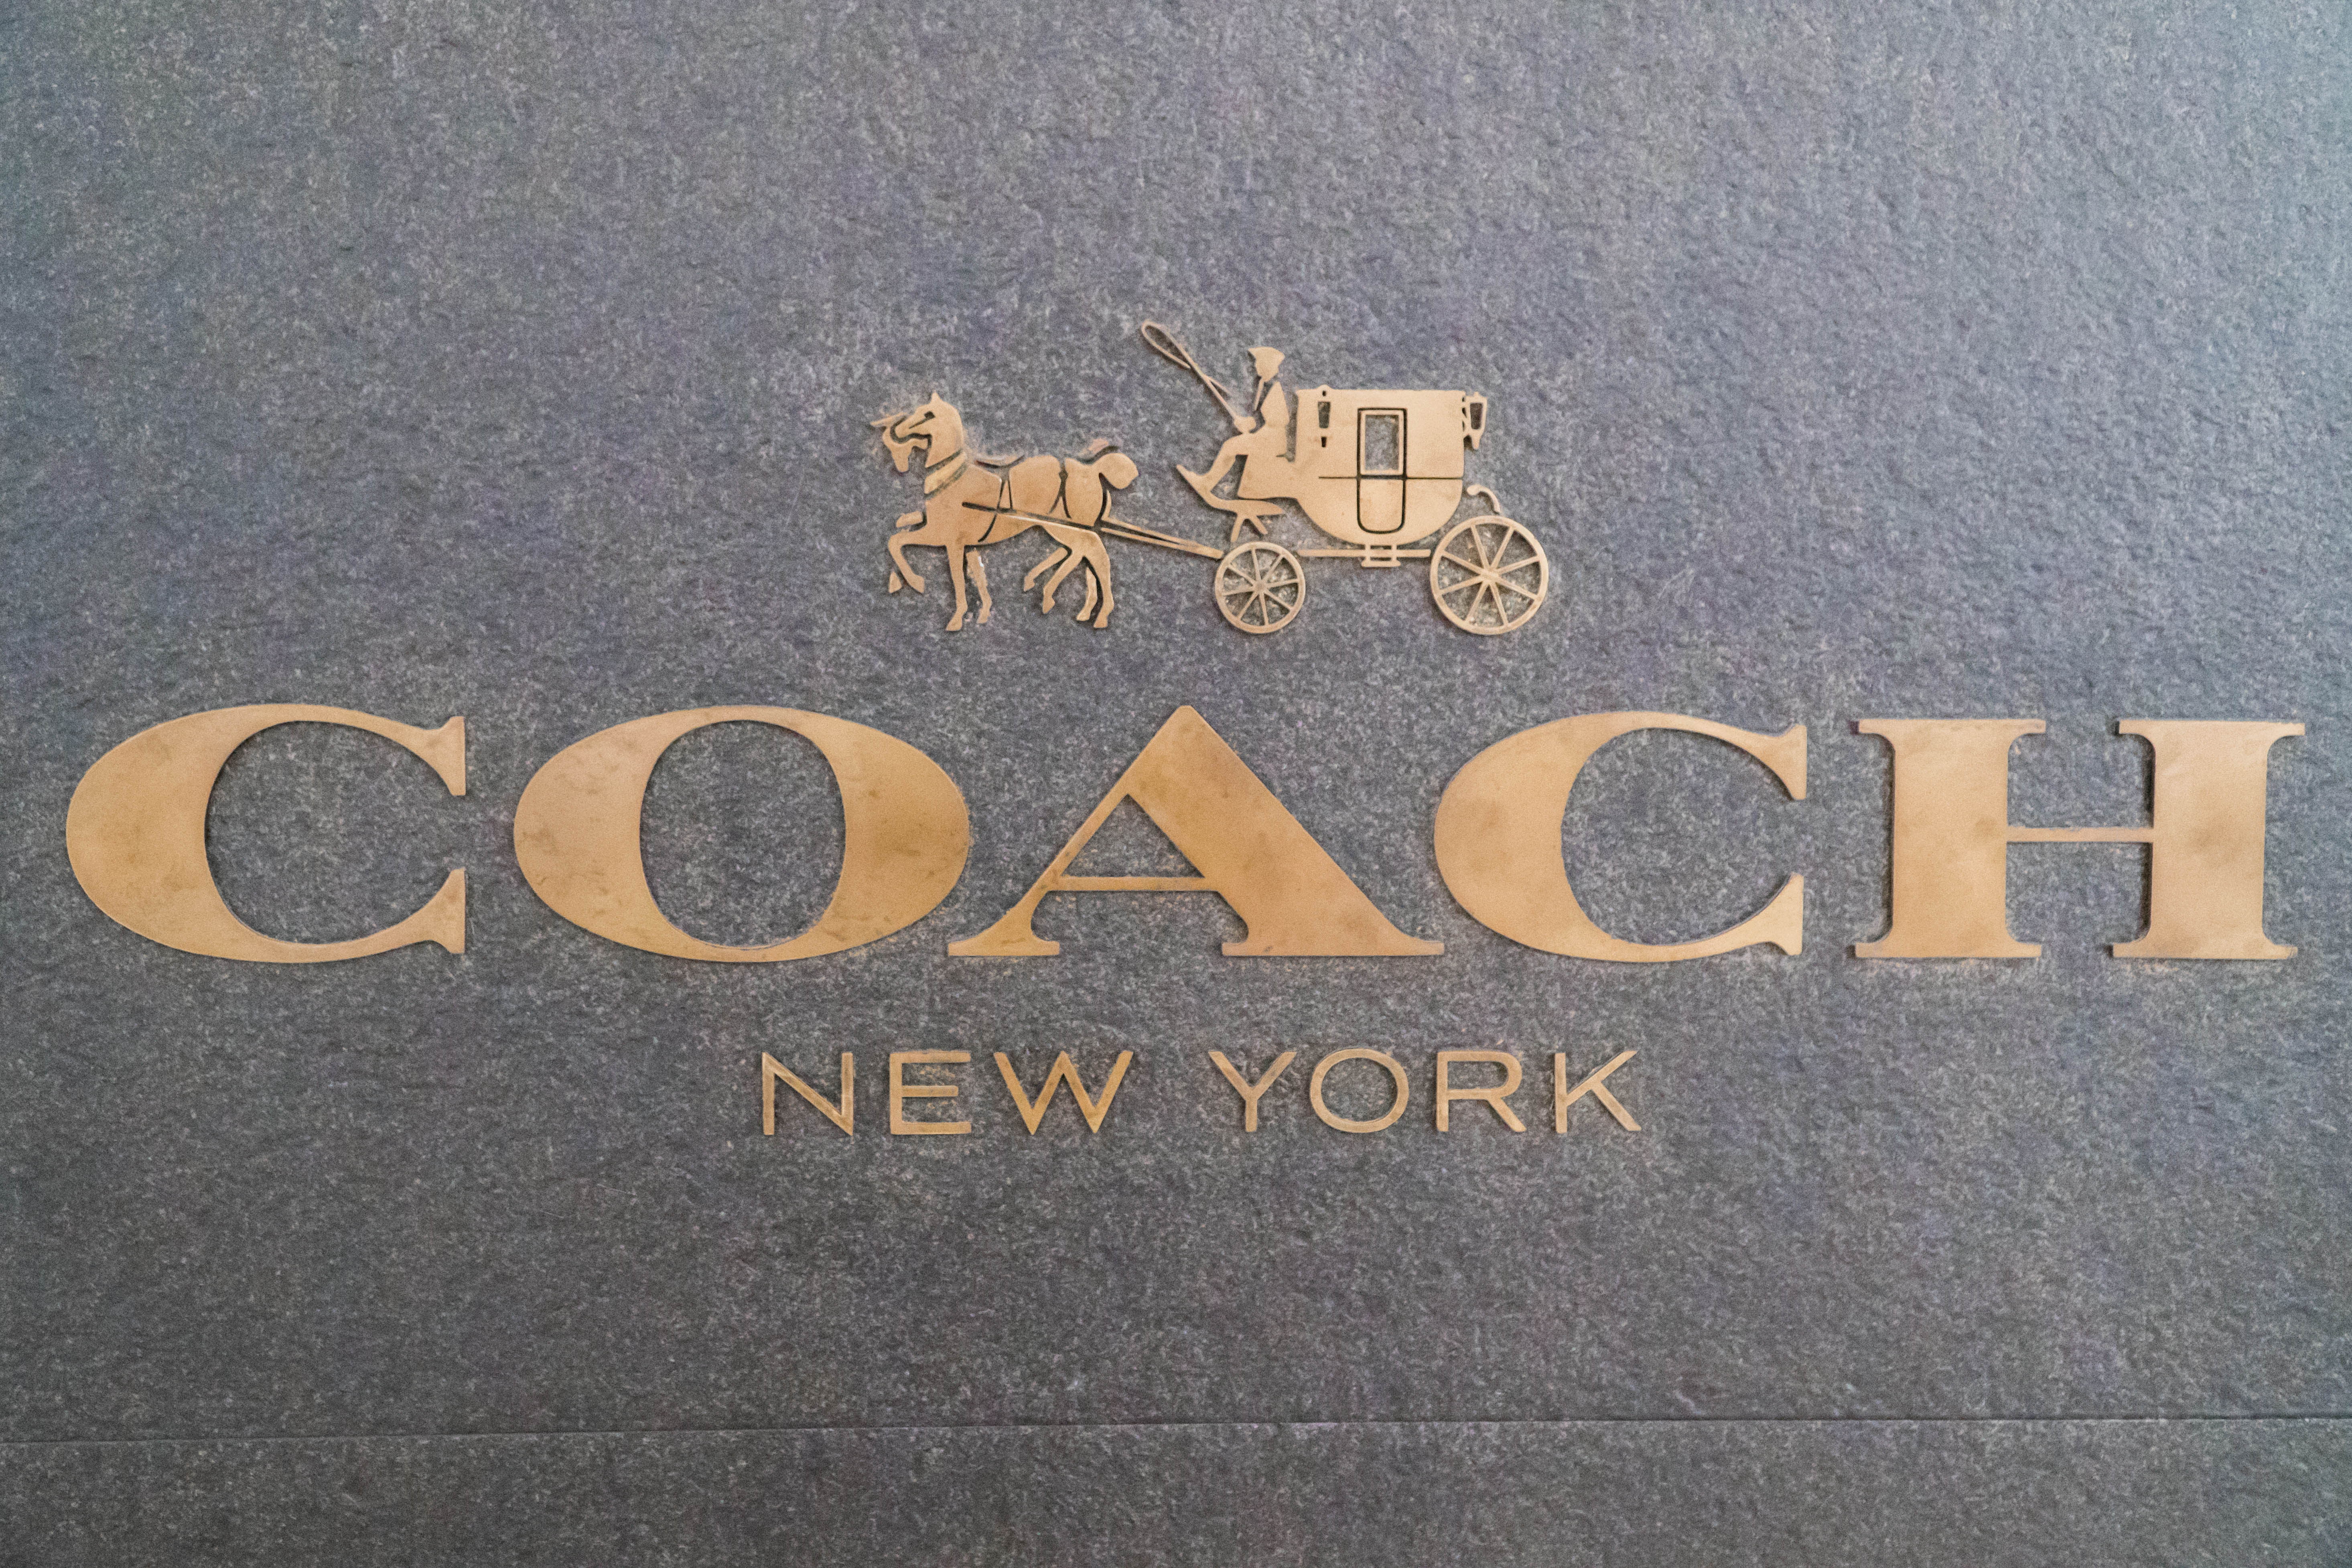 Can Coach Transform into a Global Lifestyle Brand?